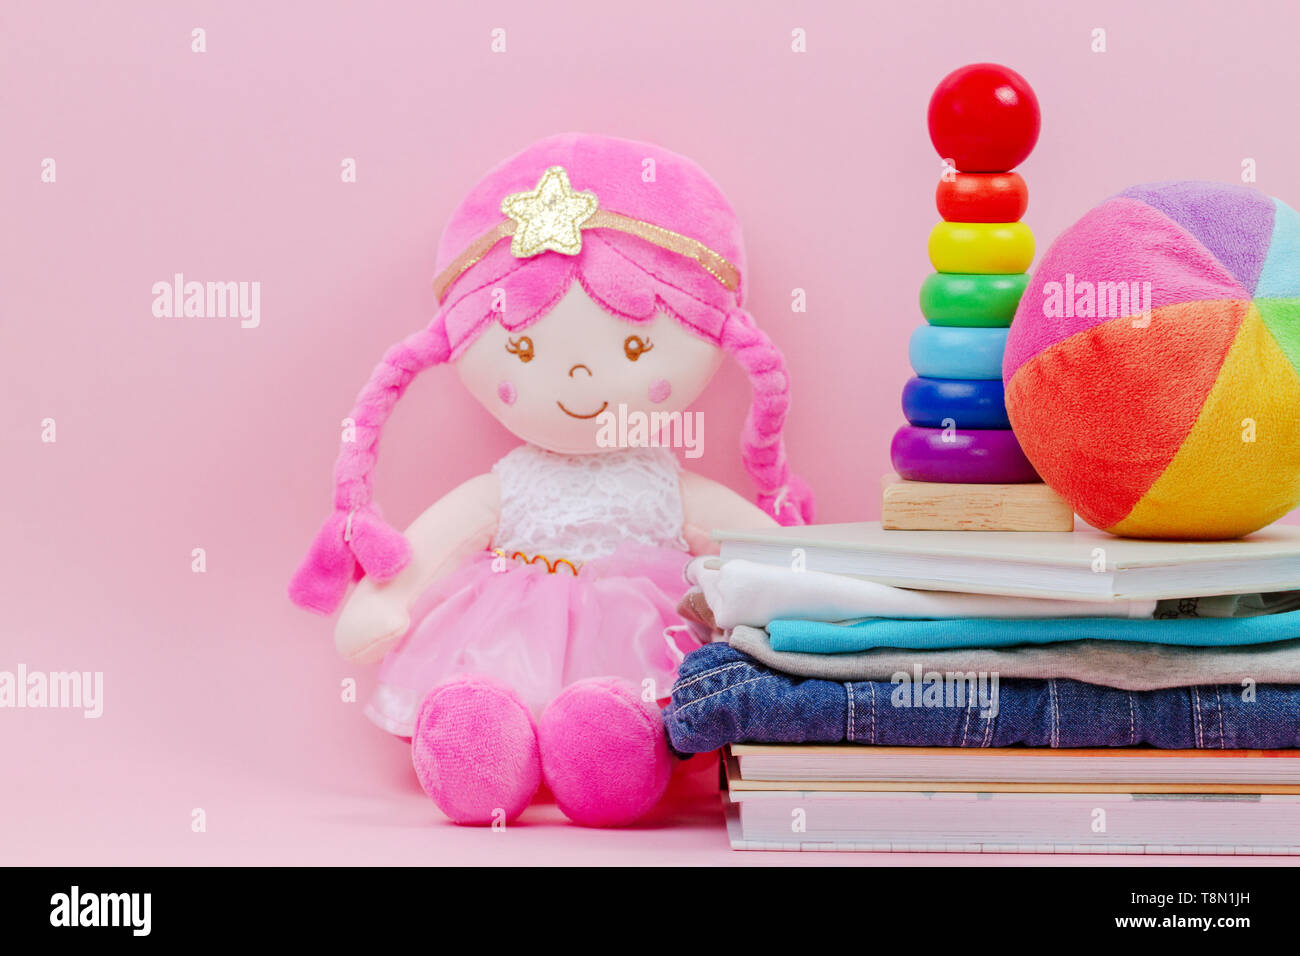 Donation, charity concept. Stuffed soft doll, baby stacking rings pyramid, kid clothes and books over pink background. Stock Photo